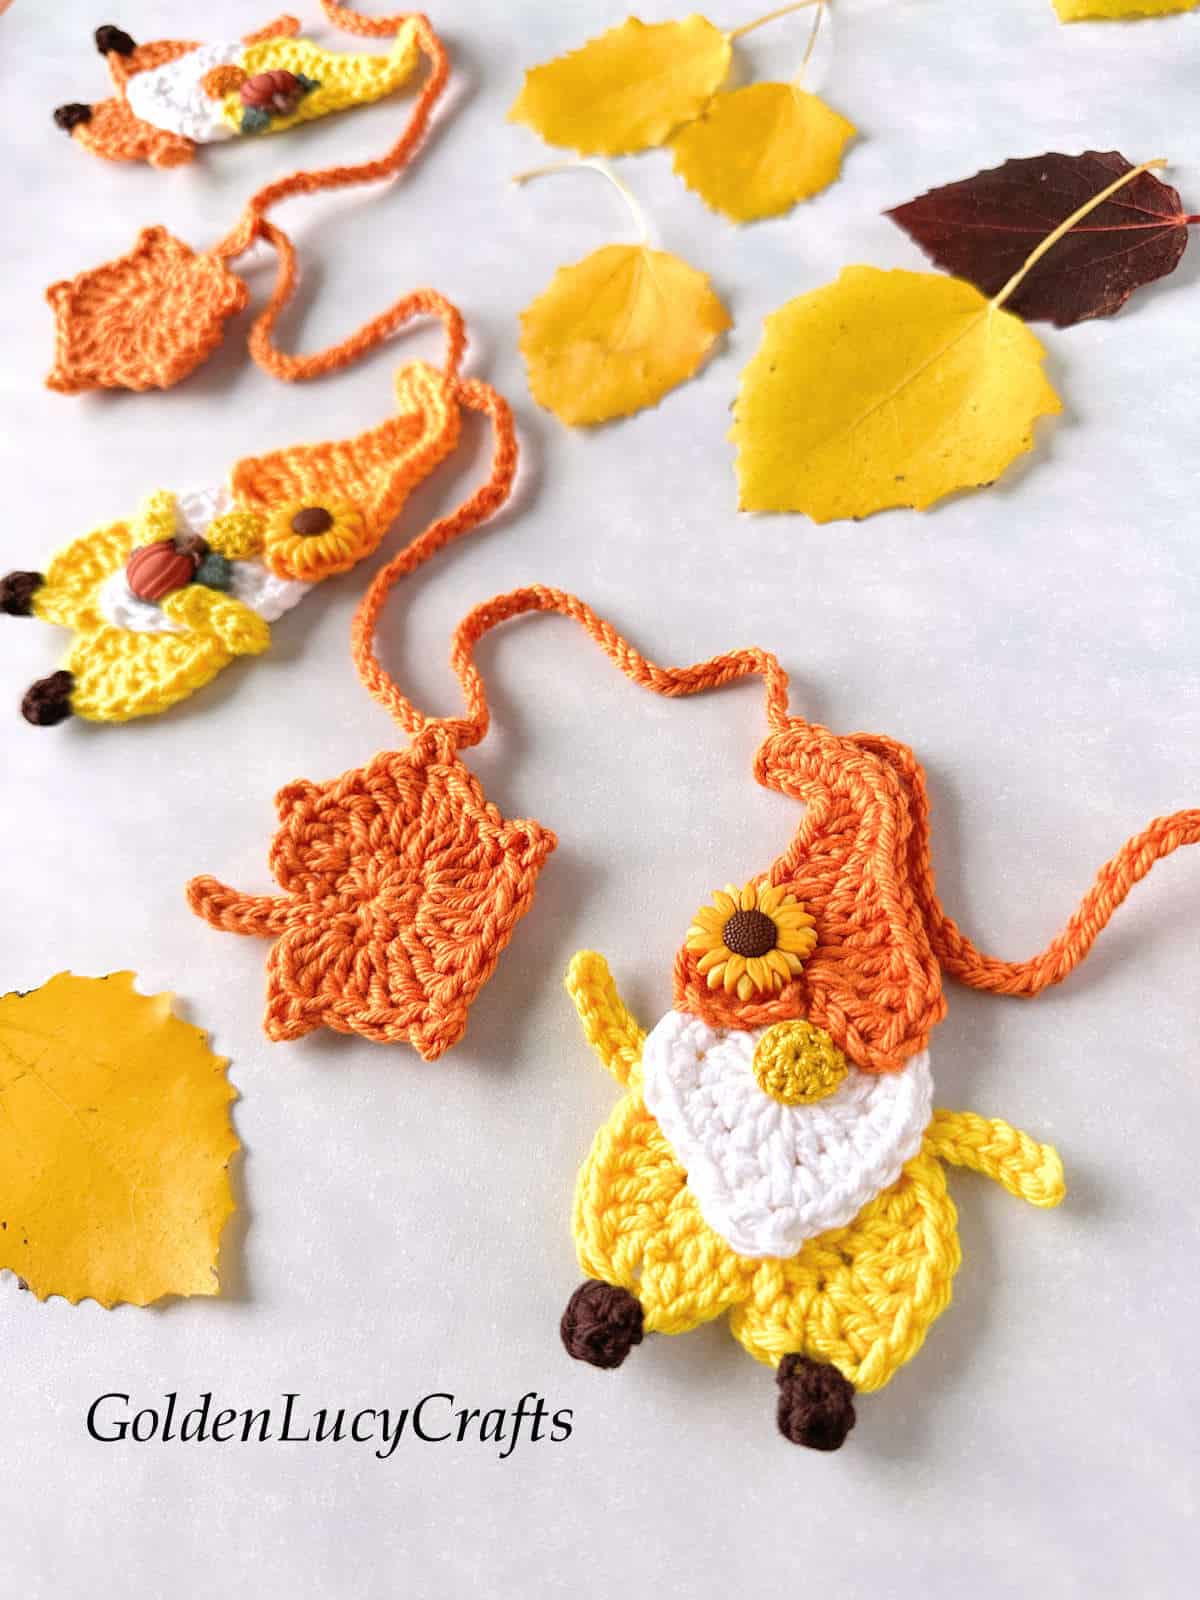 Handmade crocheted Fall garland close up picture.